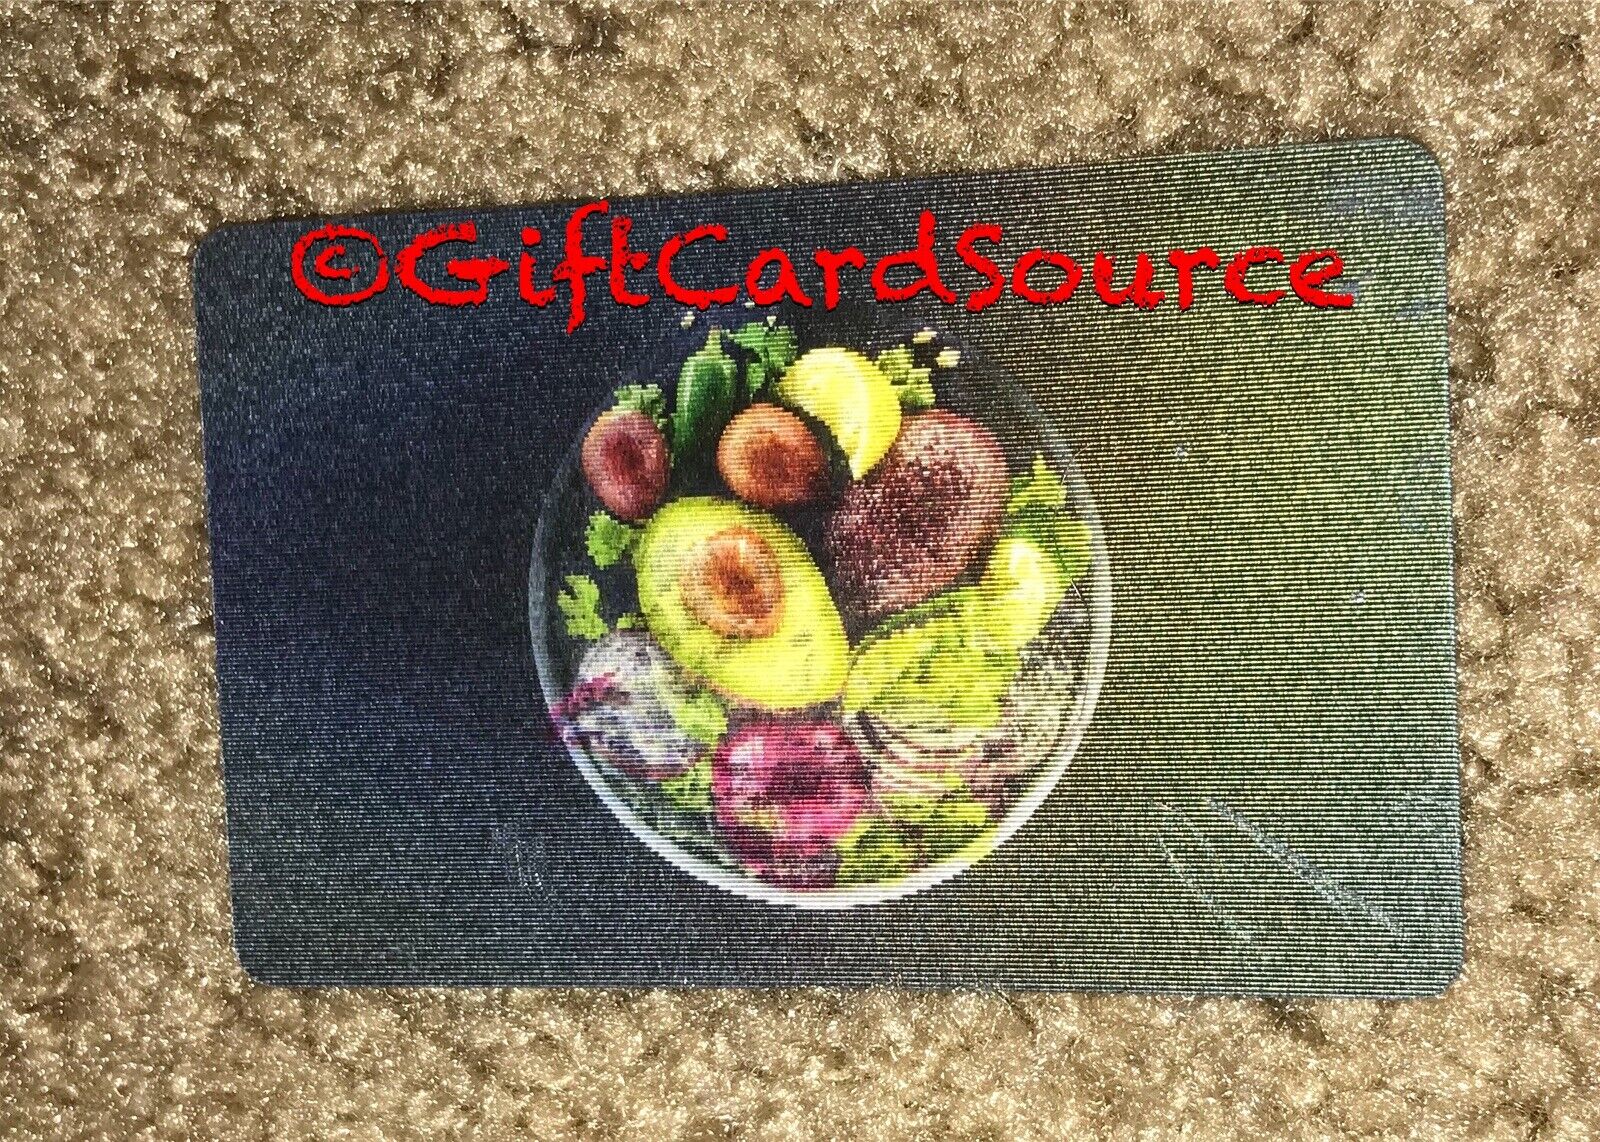 2015 CHIPOTLE GIFT CARD LENTICULAR BURRITO BOWL OF VEGGIES COLLECTIBLE NEW